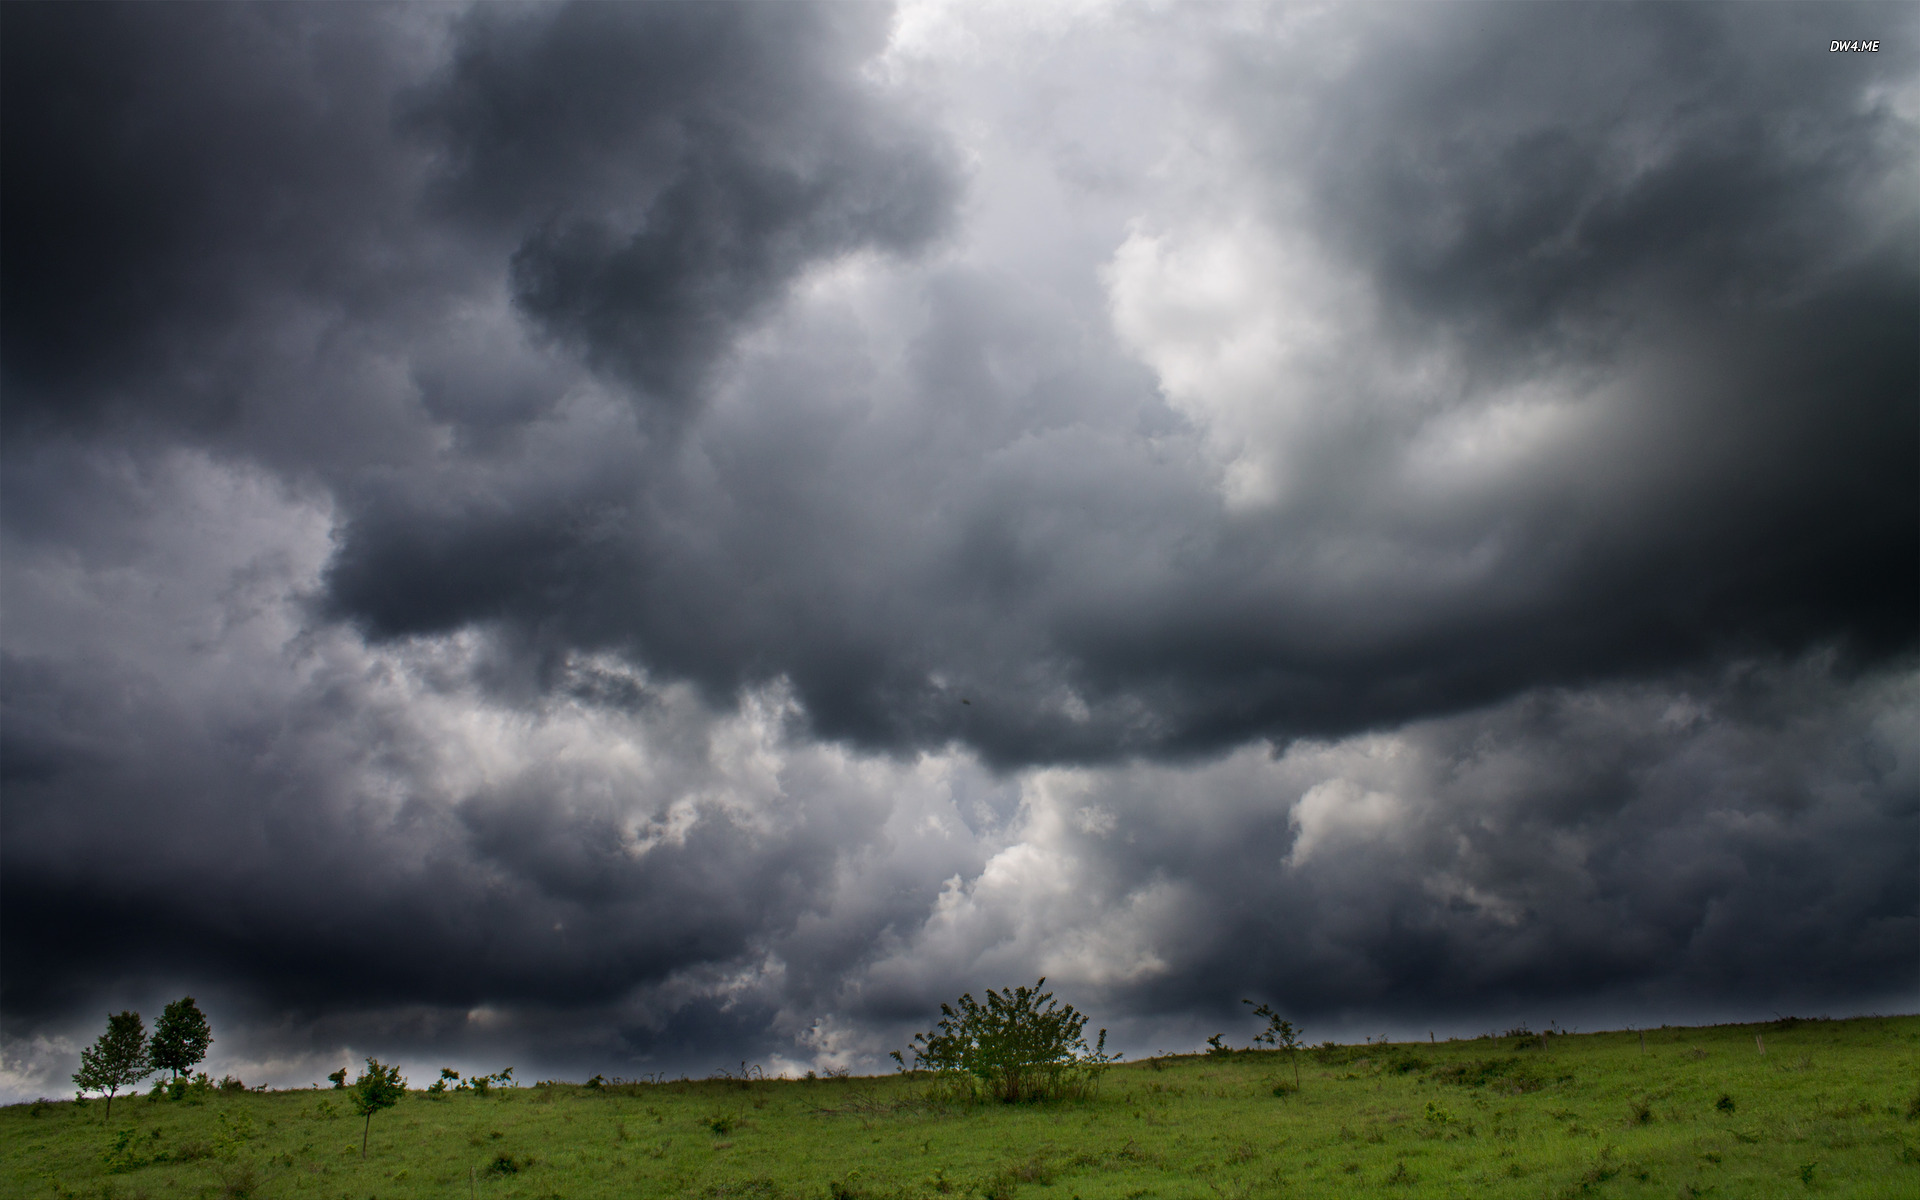 Free Download Storm Clouds Over The Field Wallpaper Nature Wallpapers 2307 19x10 For Your Desktop Mobile Tablet Explore 39 Storm Cloud Desktop Wallpaper Storm Clouds Wallpaper Wallpaper Of Storms Clouds Hd Wallpaper